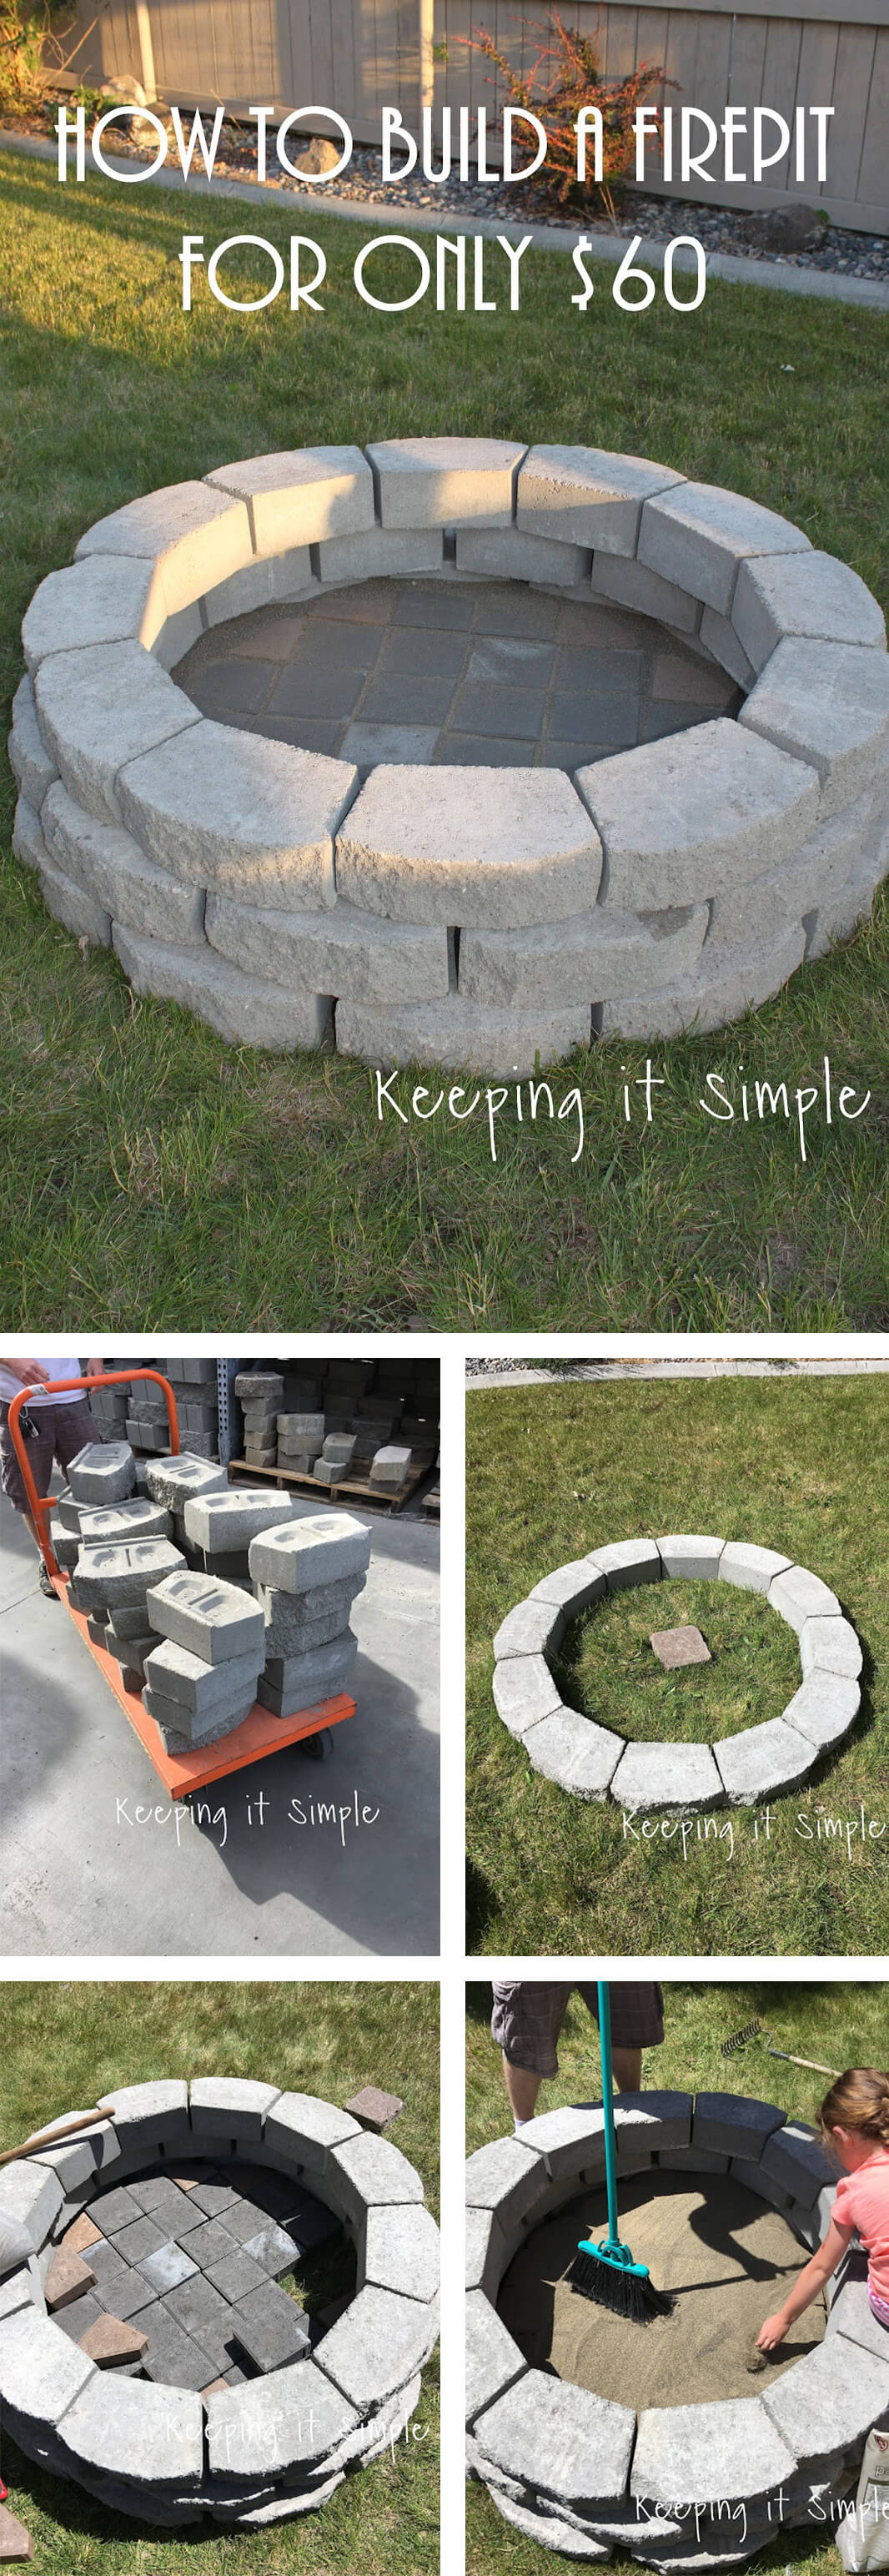 27 Best Diy Firepit Ideas And Designs, Outdoor Stone Fire Pit Design Ideas